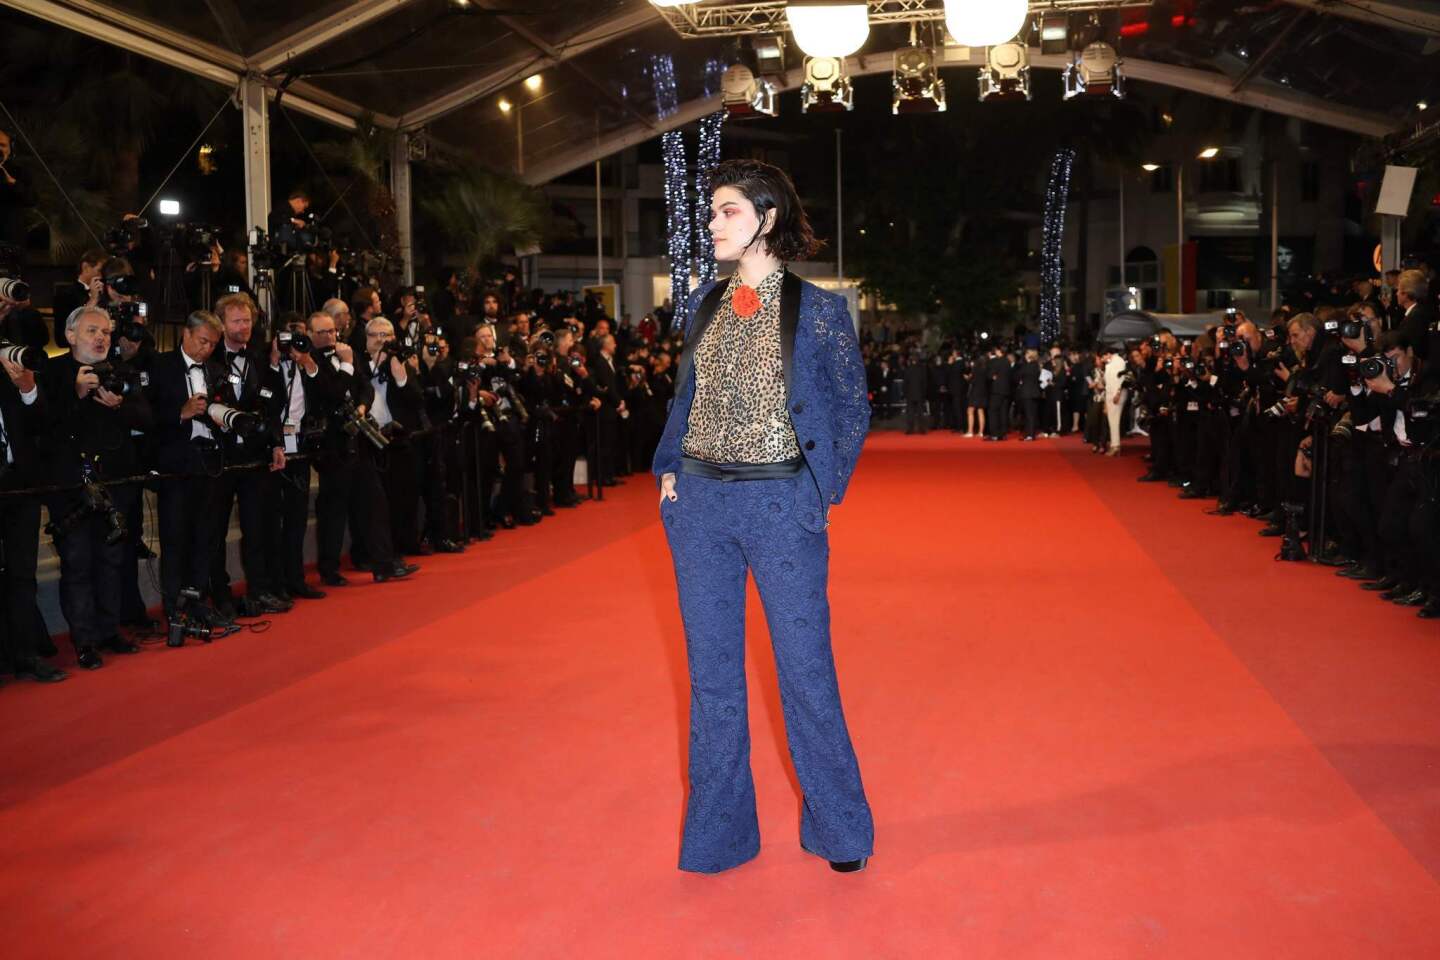 French actress and singer Stephanie Sokolinski arrives for the screening of the film "It's Only The End Of The World" at the 69th Cannes Film Festival.